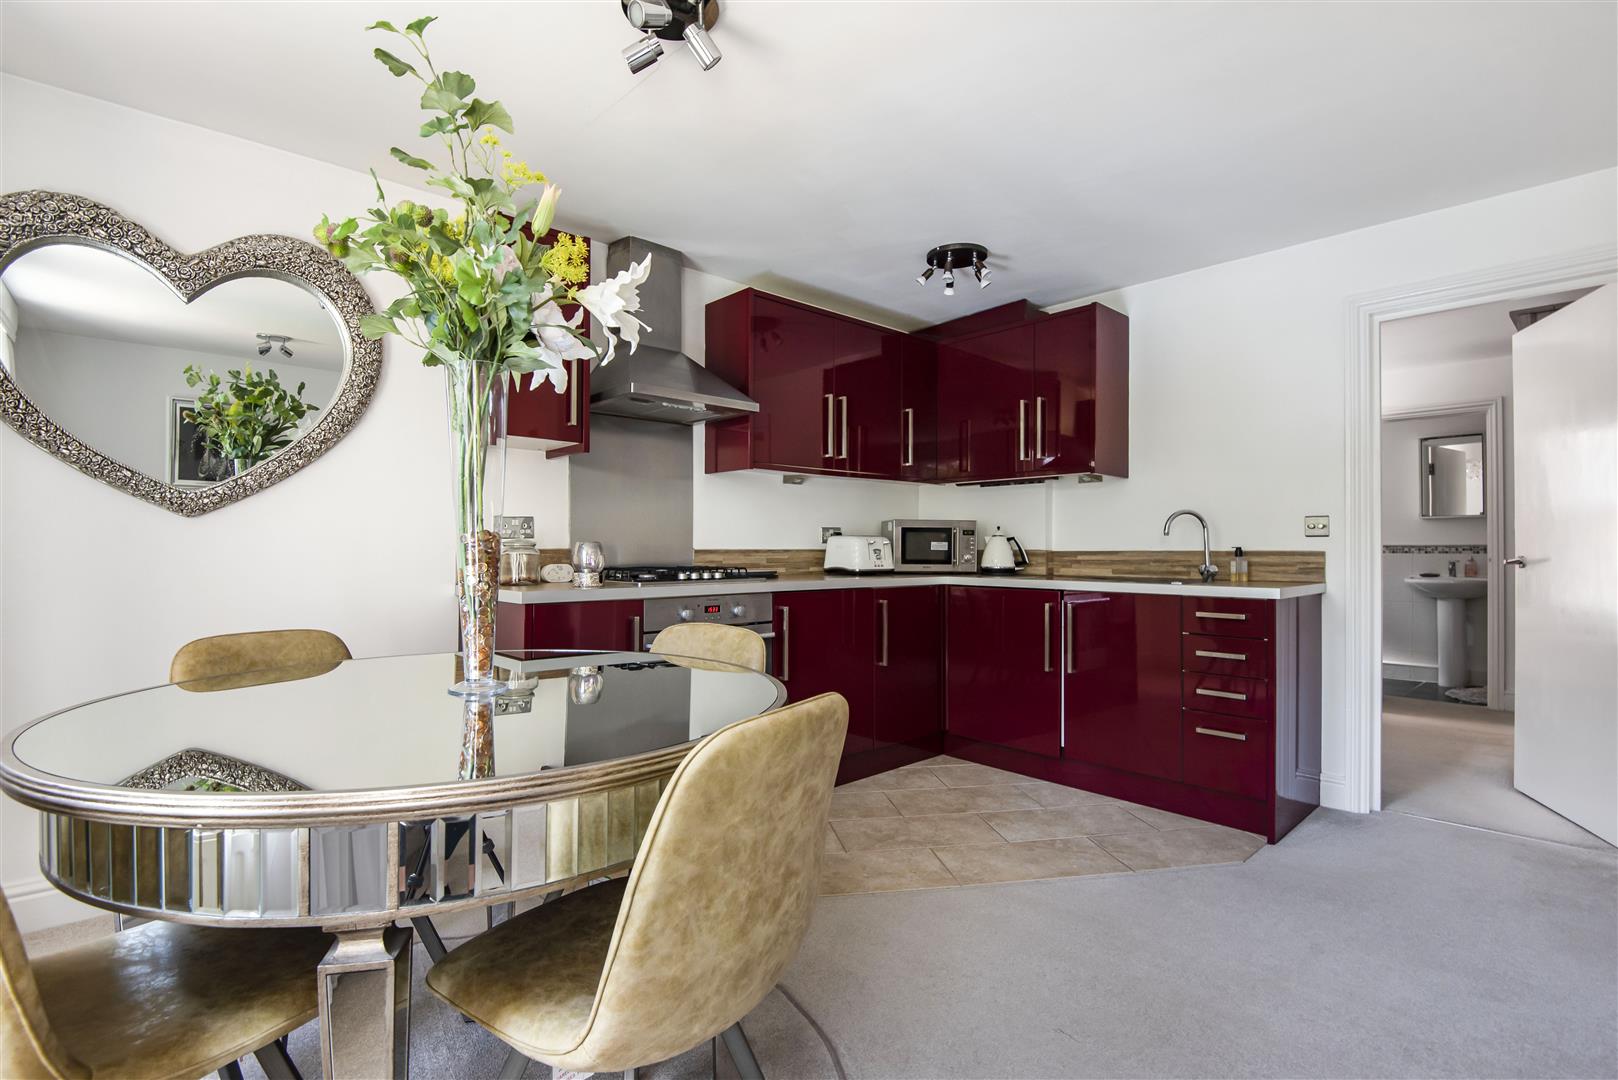 12 Woodcote Road Caversham Apartment for sale in Reading